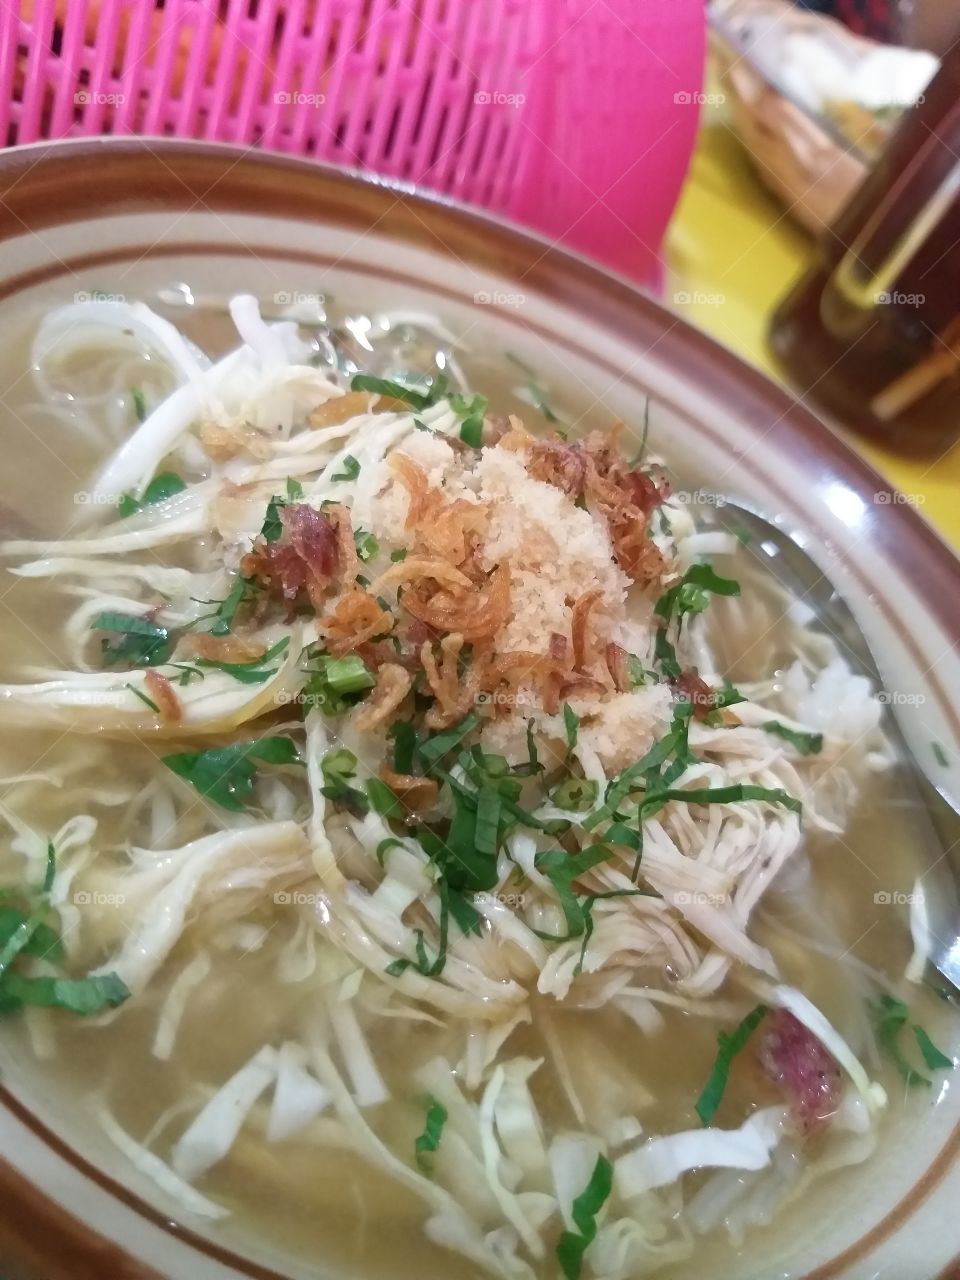 soto, it's cheap you can get it just Rp 7.000,00-